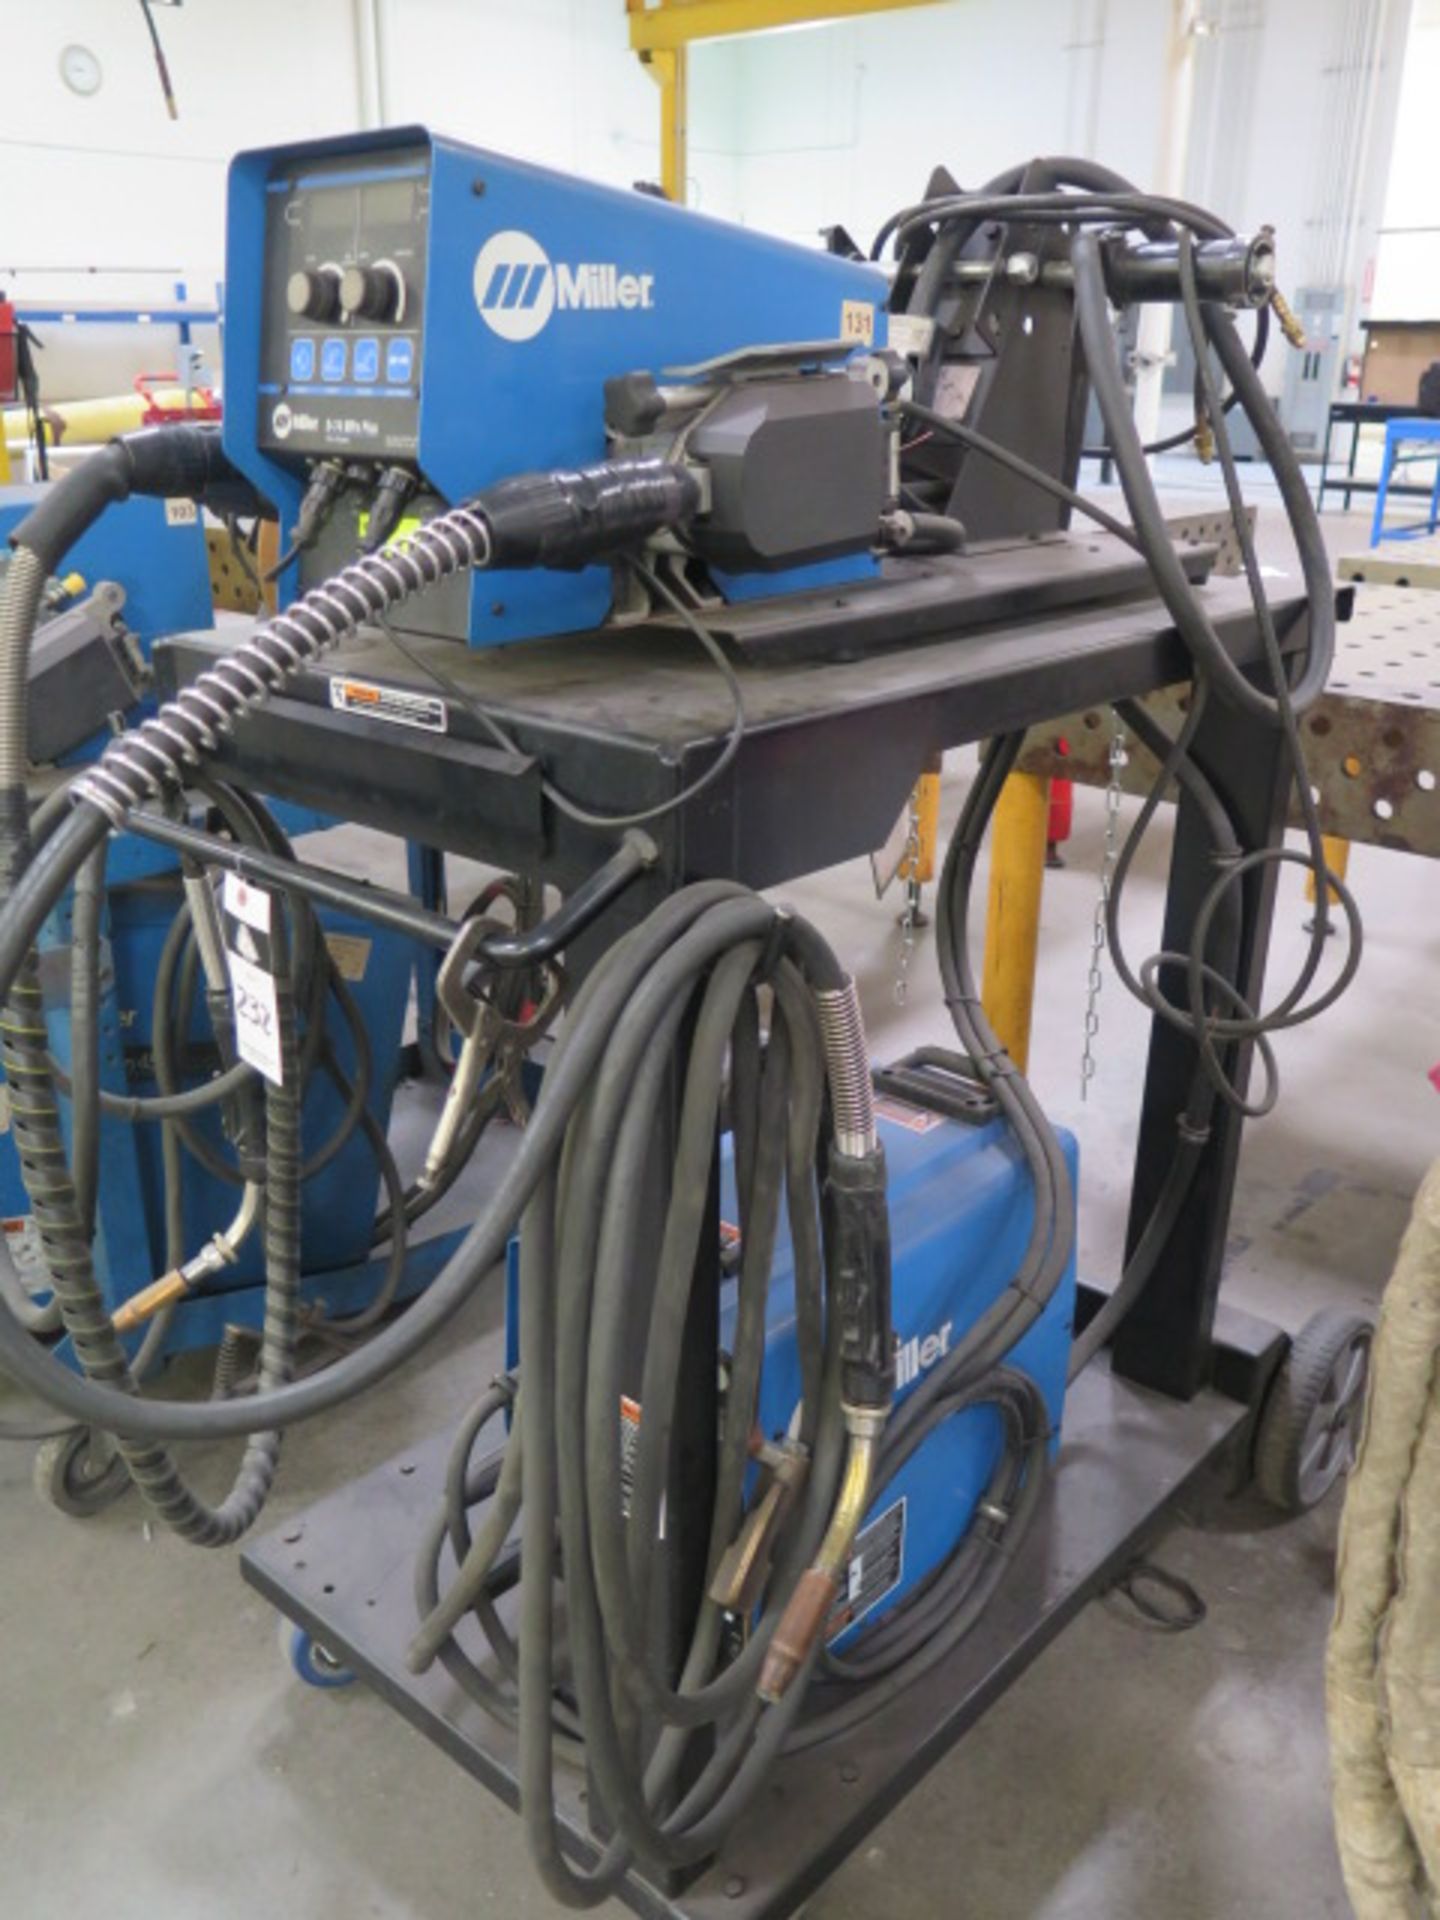 Miller Invision 352 MPa Auto-Line Series Arc Welding Power Source s/n MC220584U w/ Miller D-74 MPa - Image 2 of 7